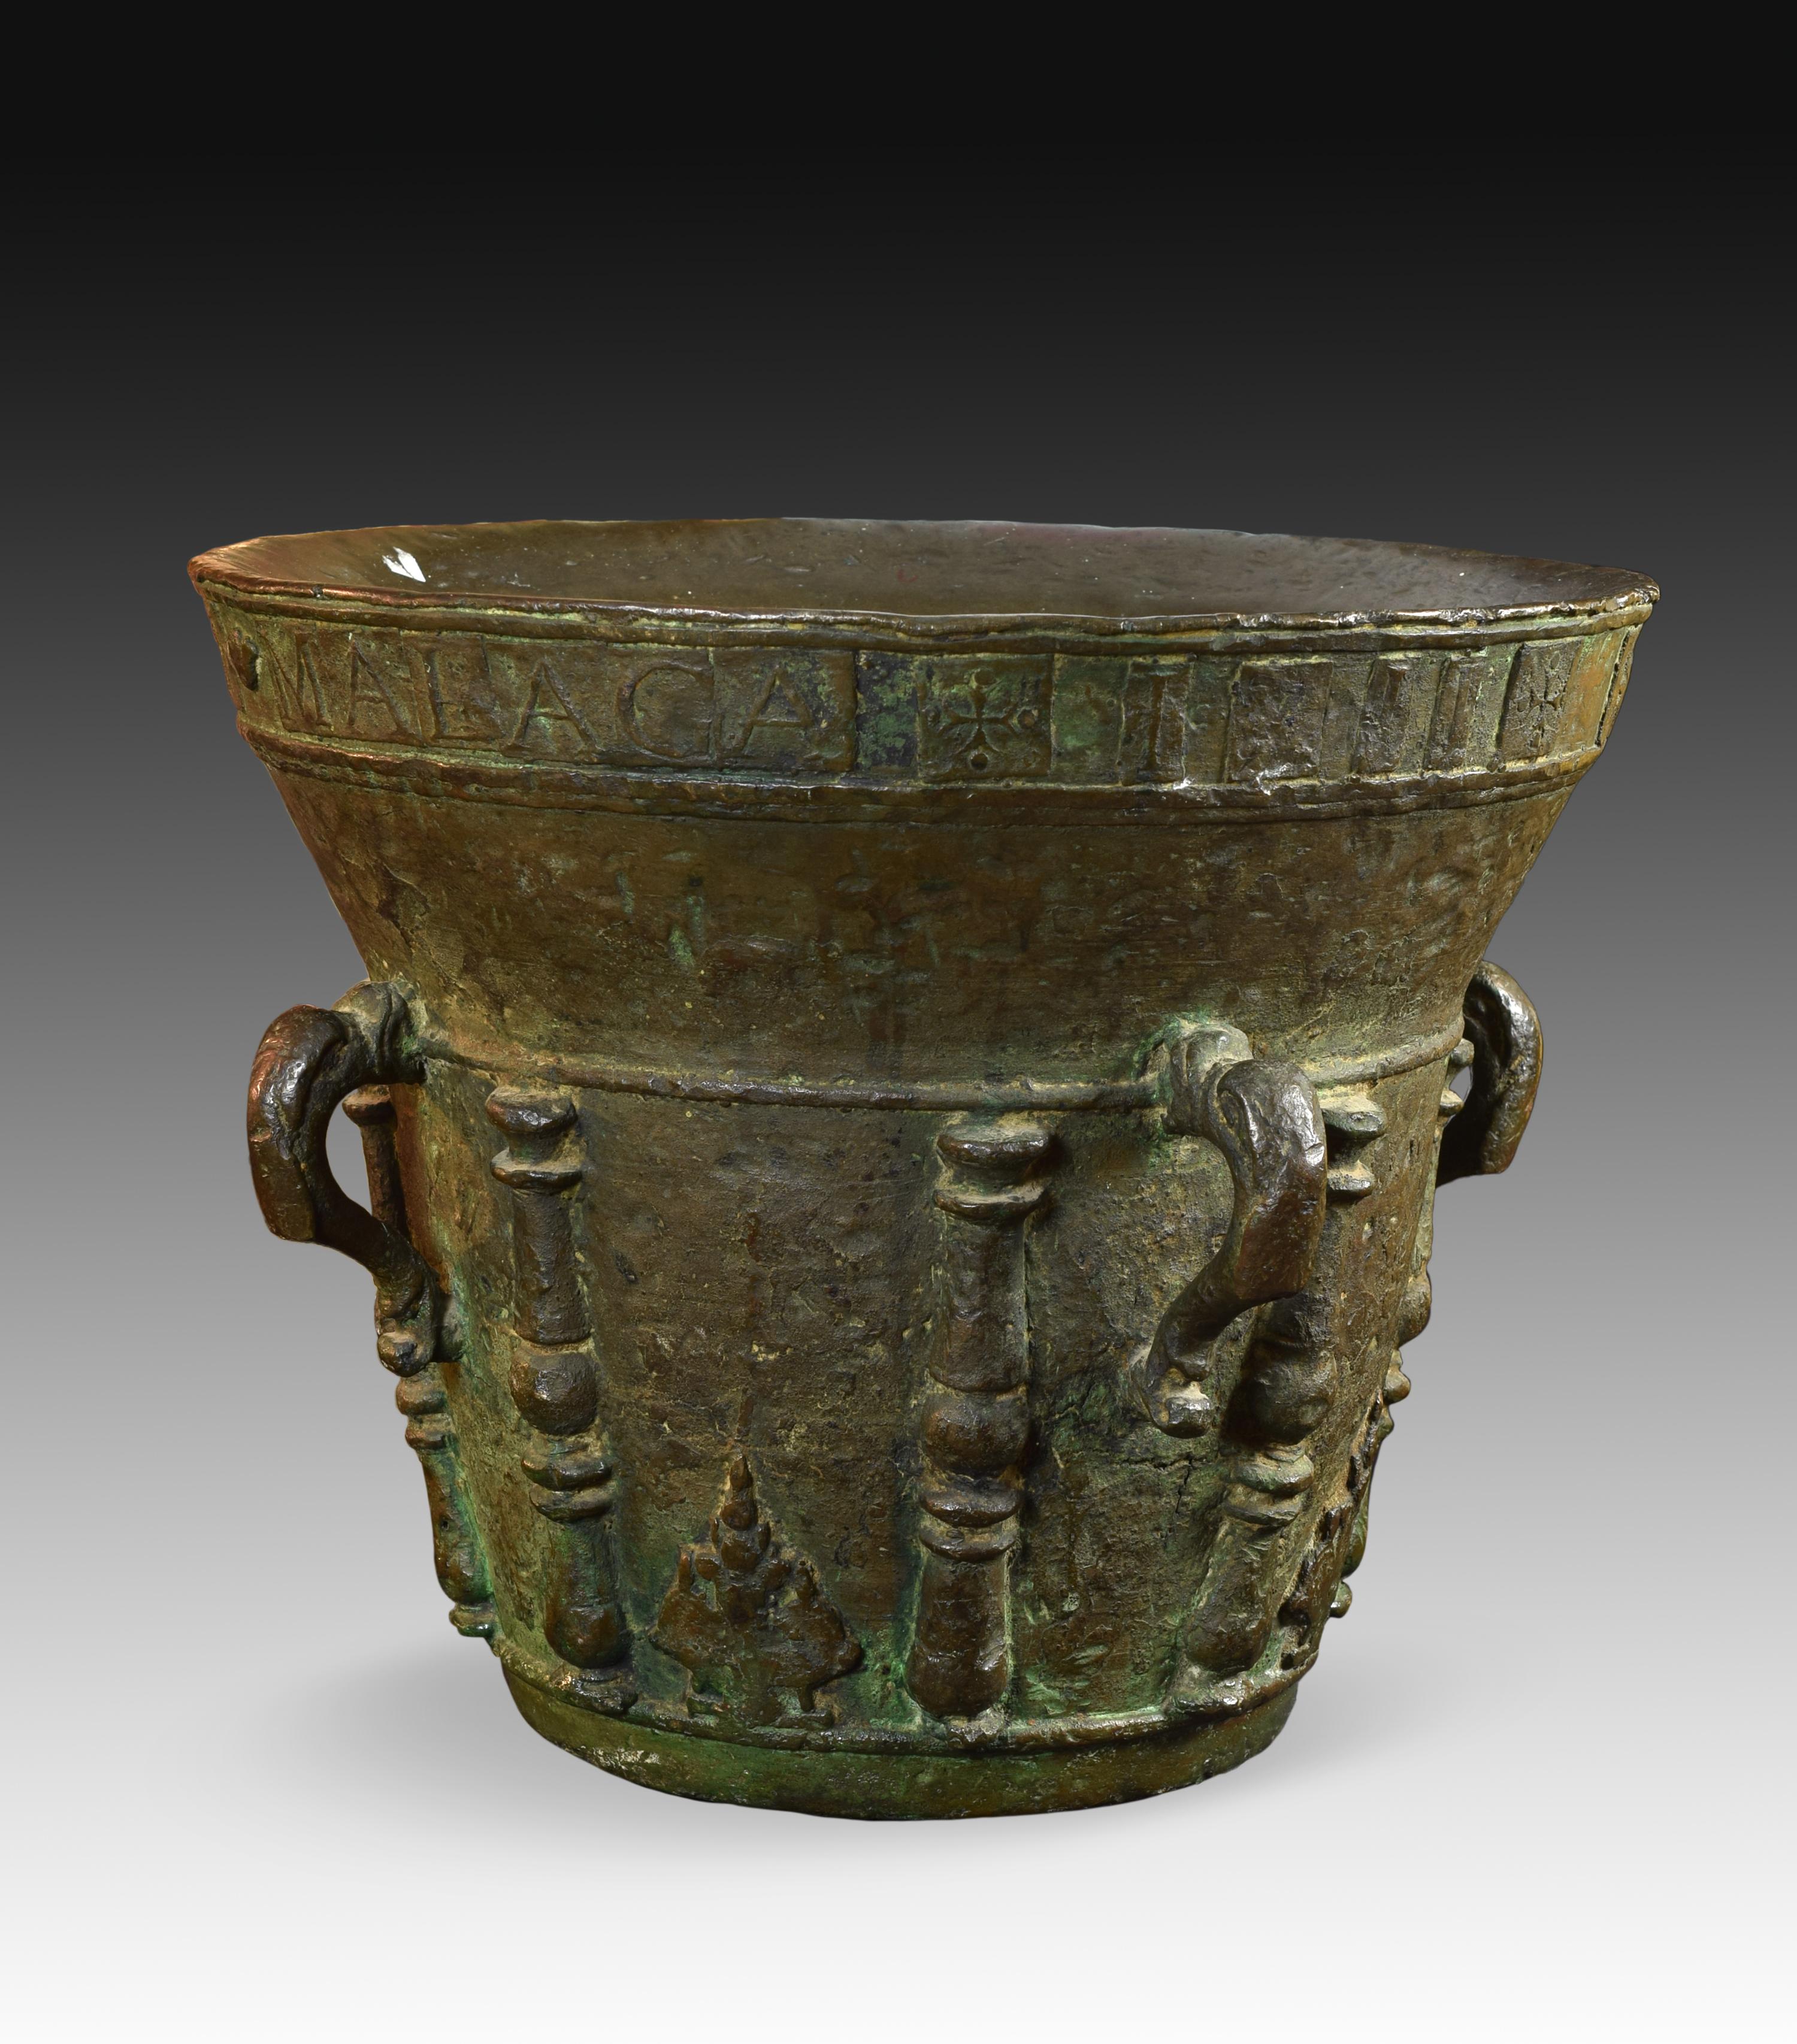 Spanish Bronze Pharmacy Mortar, Signed and Dated 'Bargas, 1711'